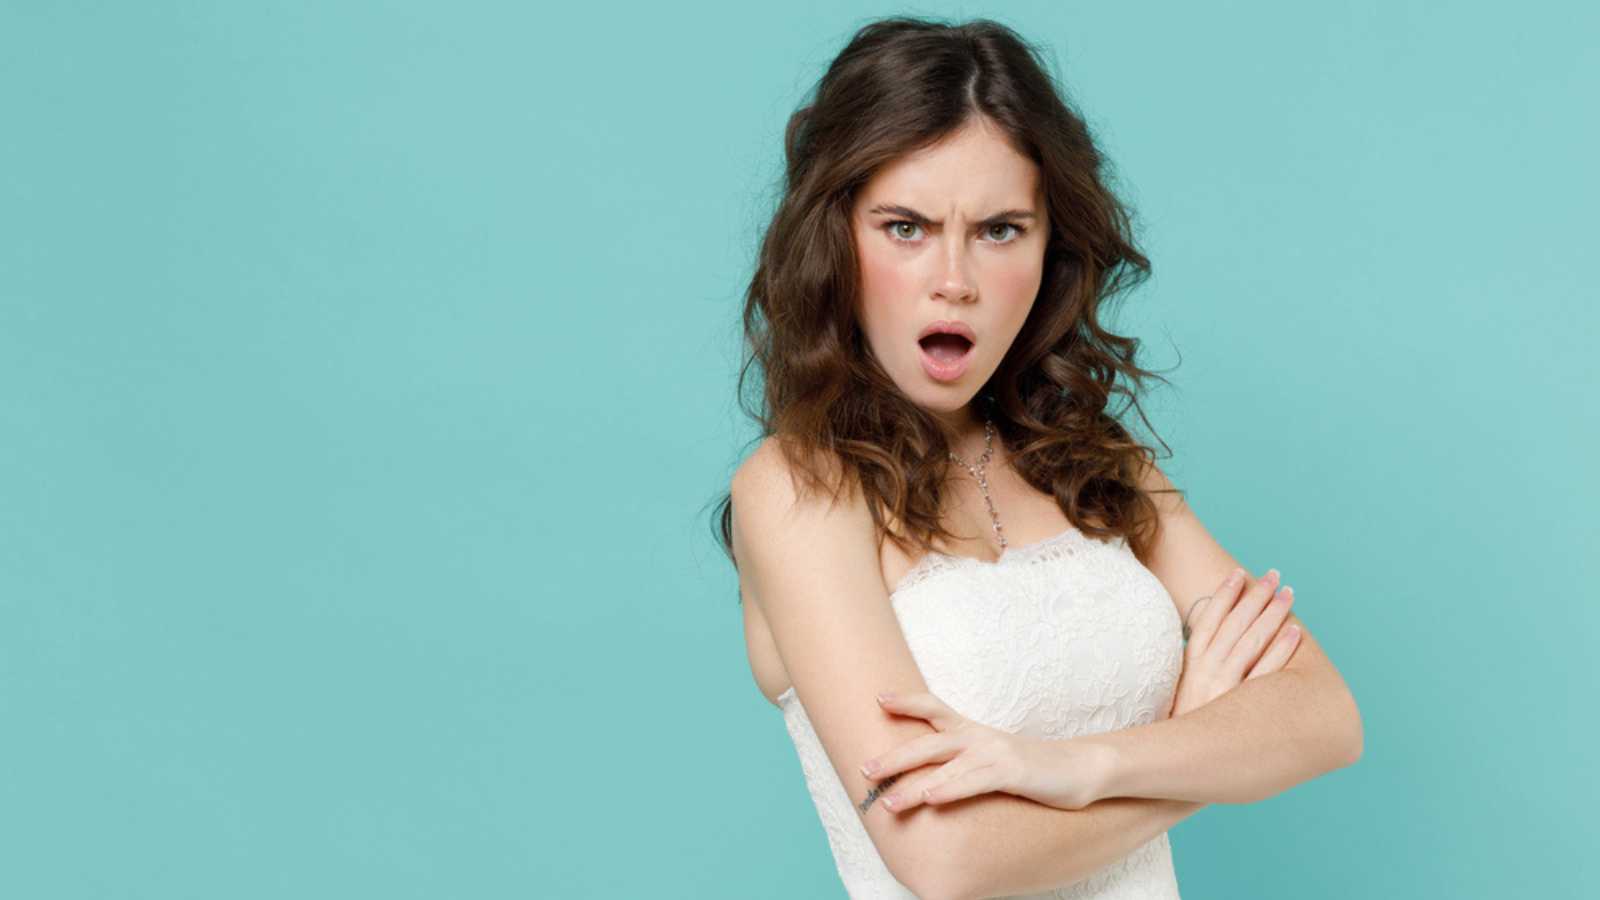 Woman giving angry look